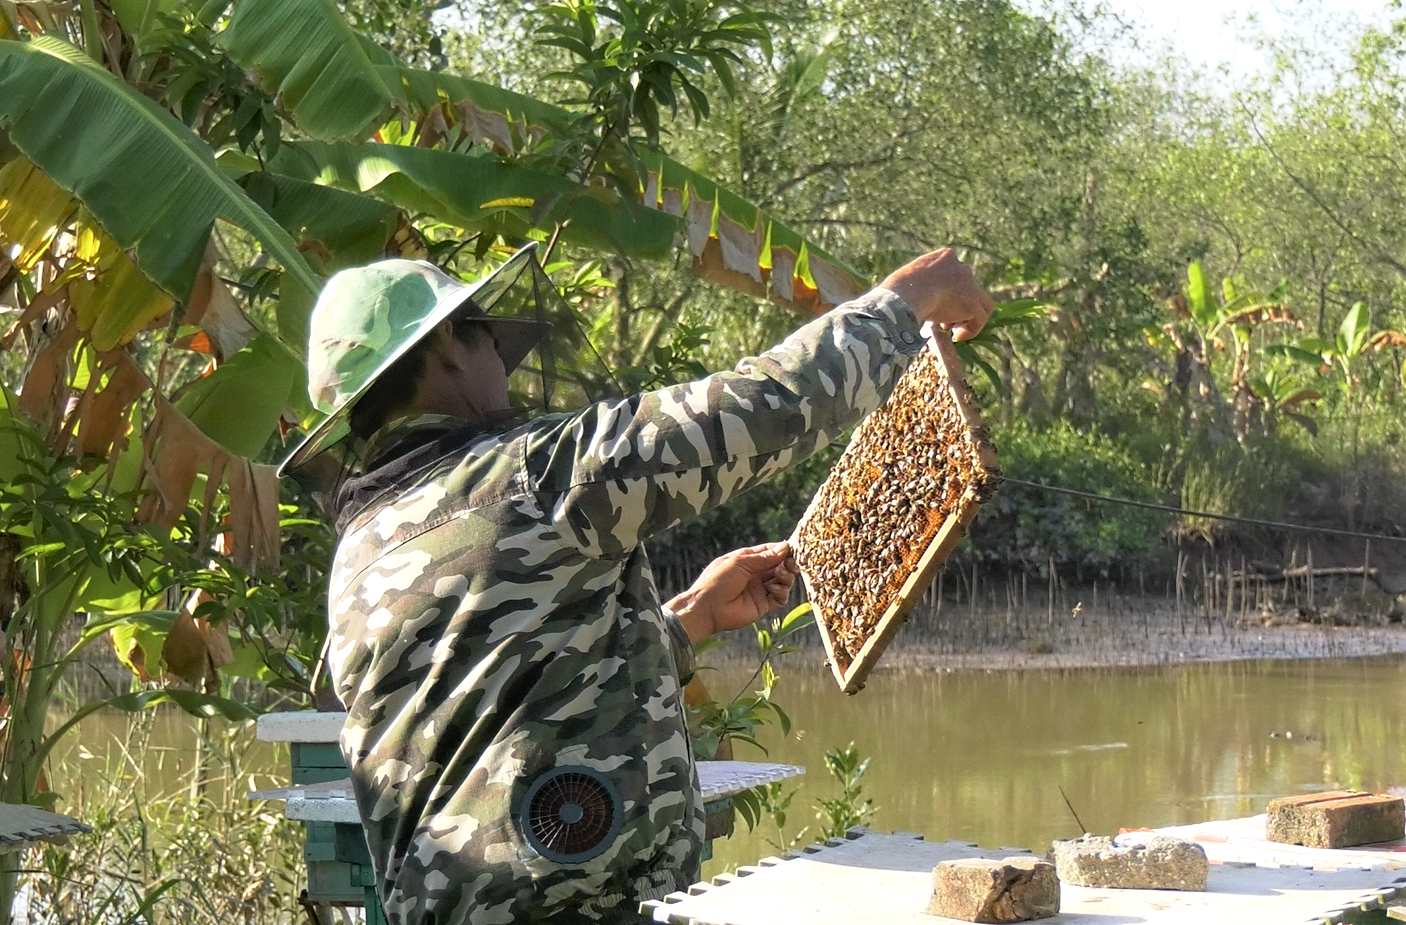 Many households in Dai Hop commune, Kien Thuy district have switched from aquaculture to beekeeping. Photo: Dinh Muoi.